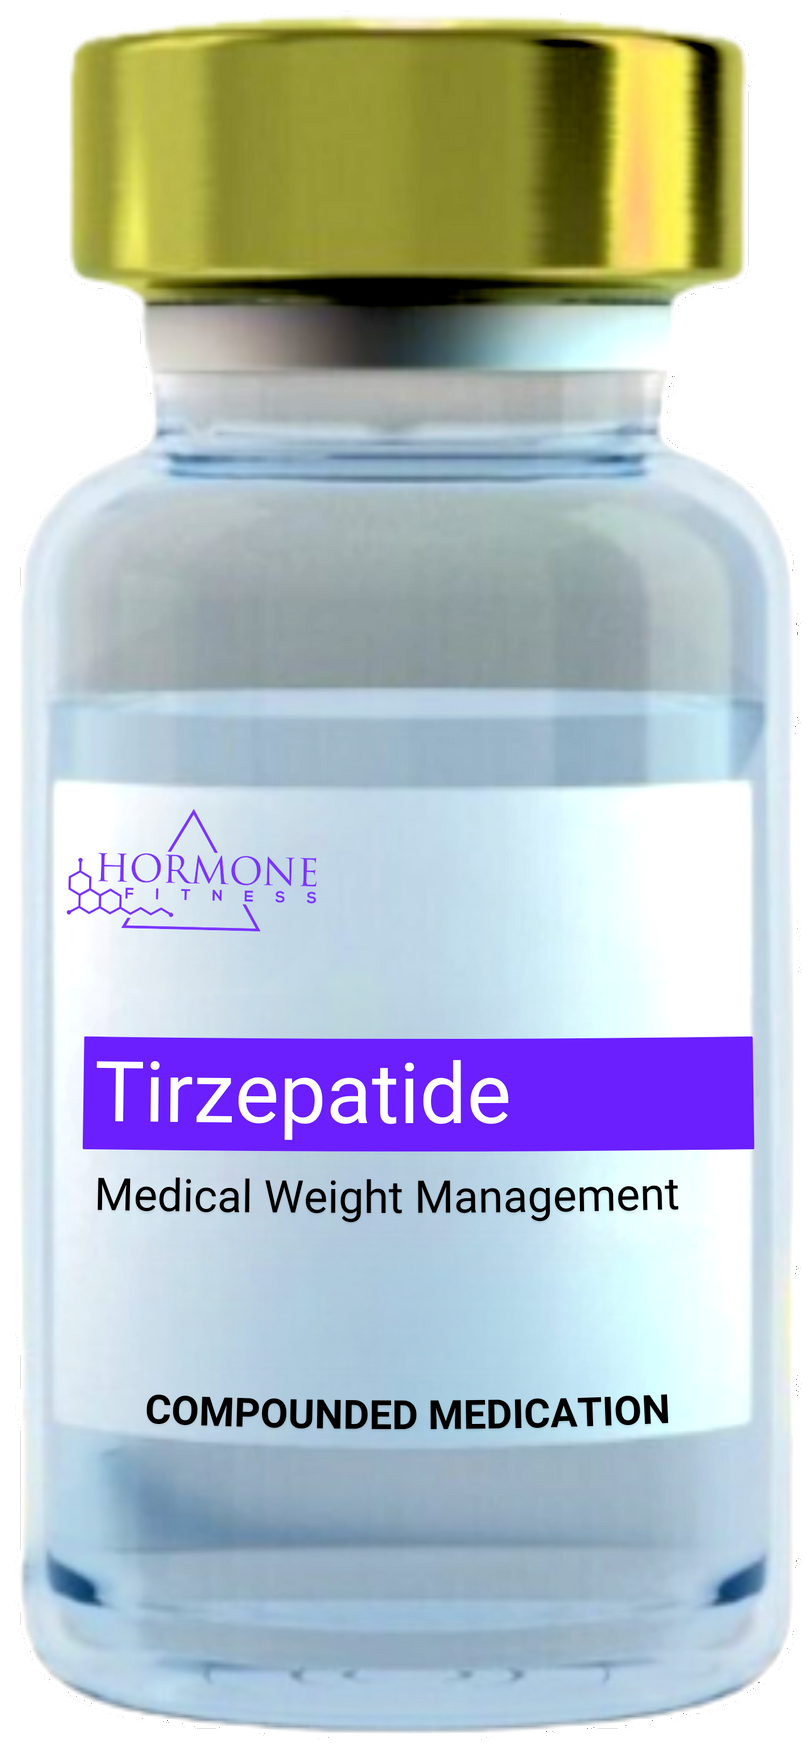 A vial of tirzepatide medical weight management compounded medication